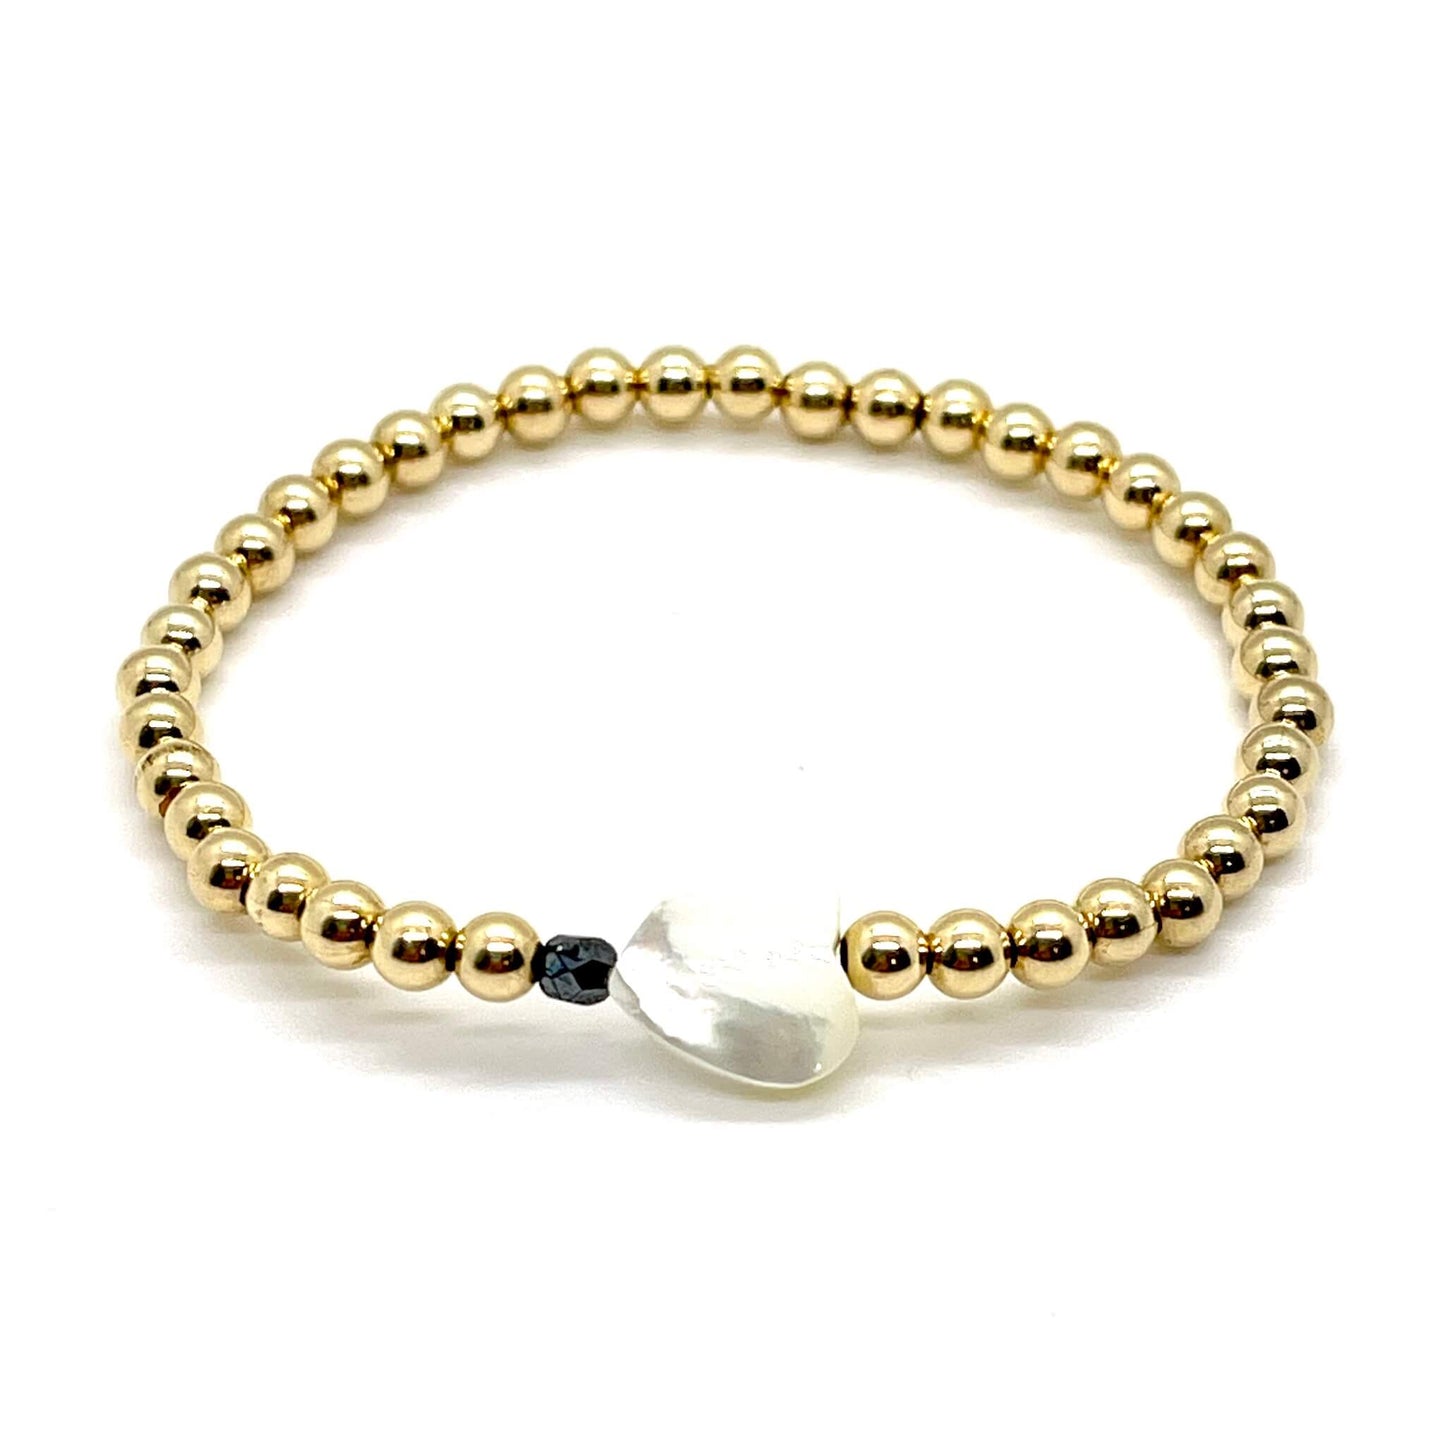 Gold heart bracelet with a mother-of-pearl heart, a small faceted black hemitite crystal, and 4mm 14K gold filled beads.